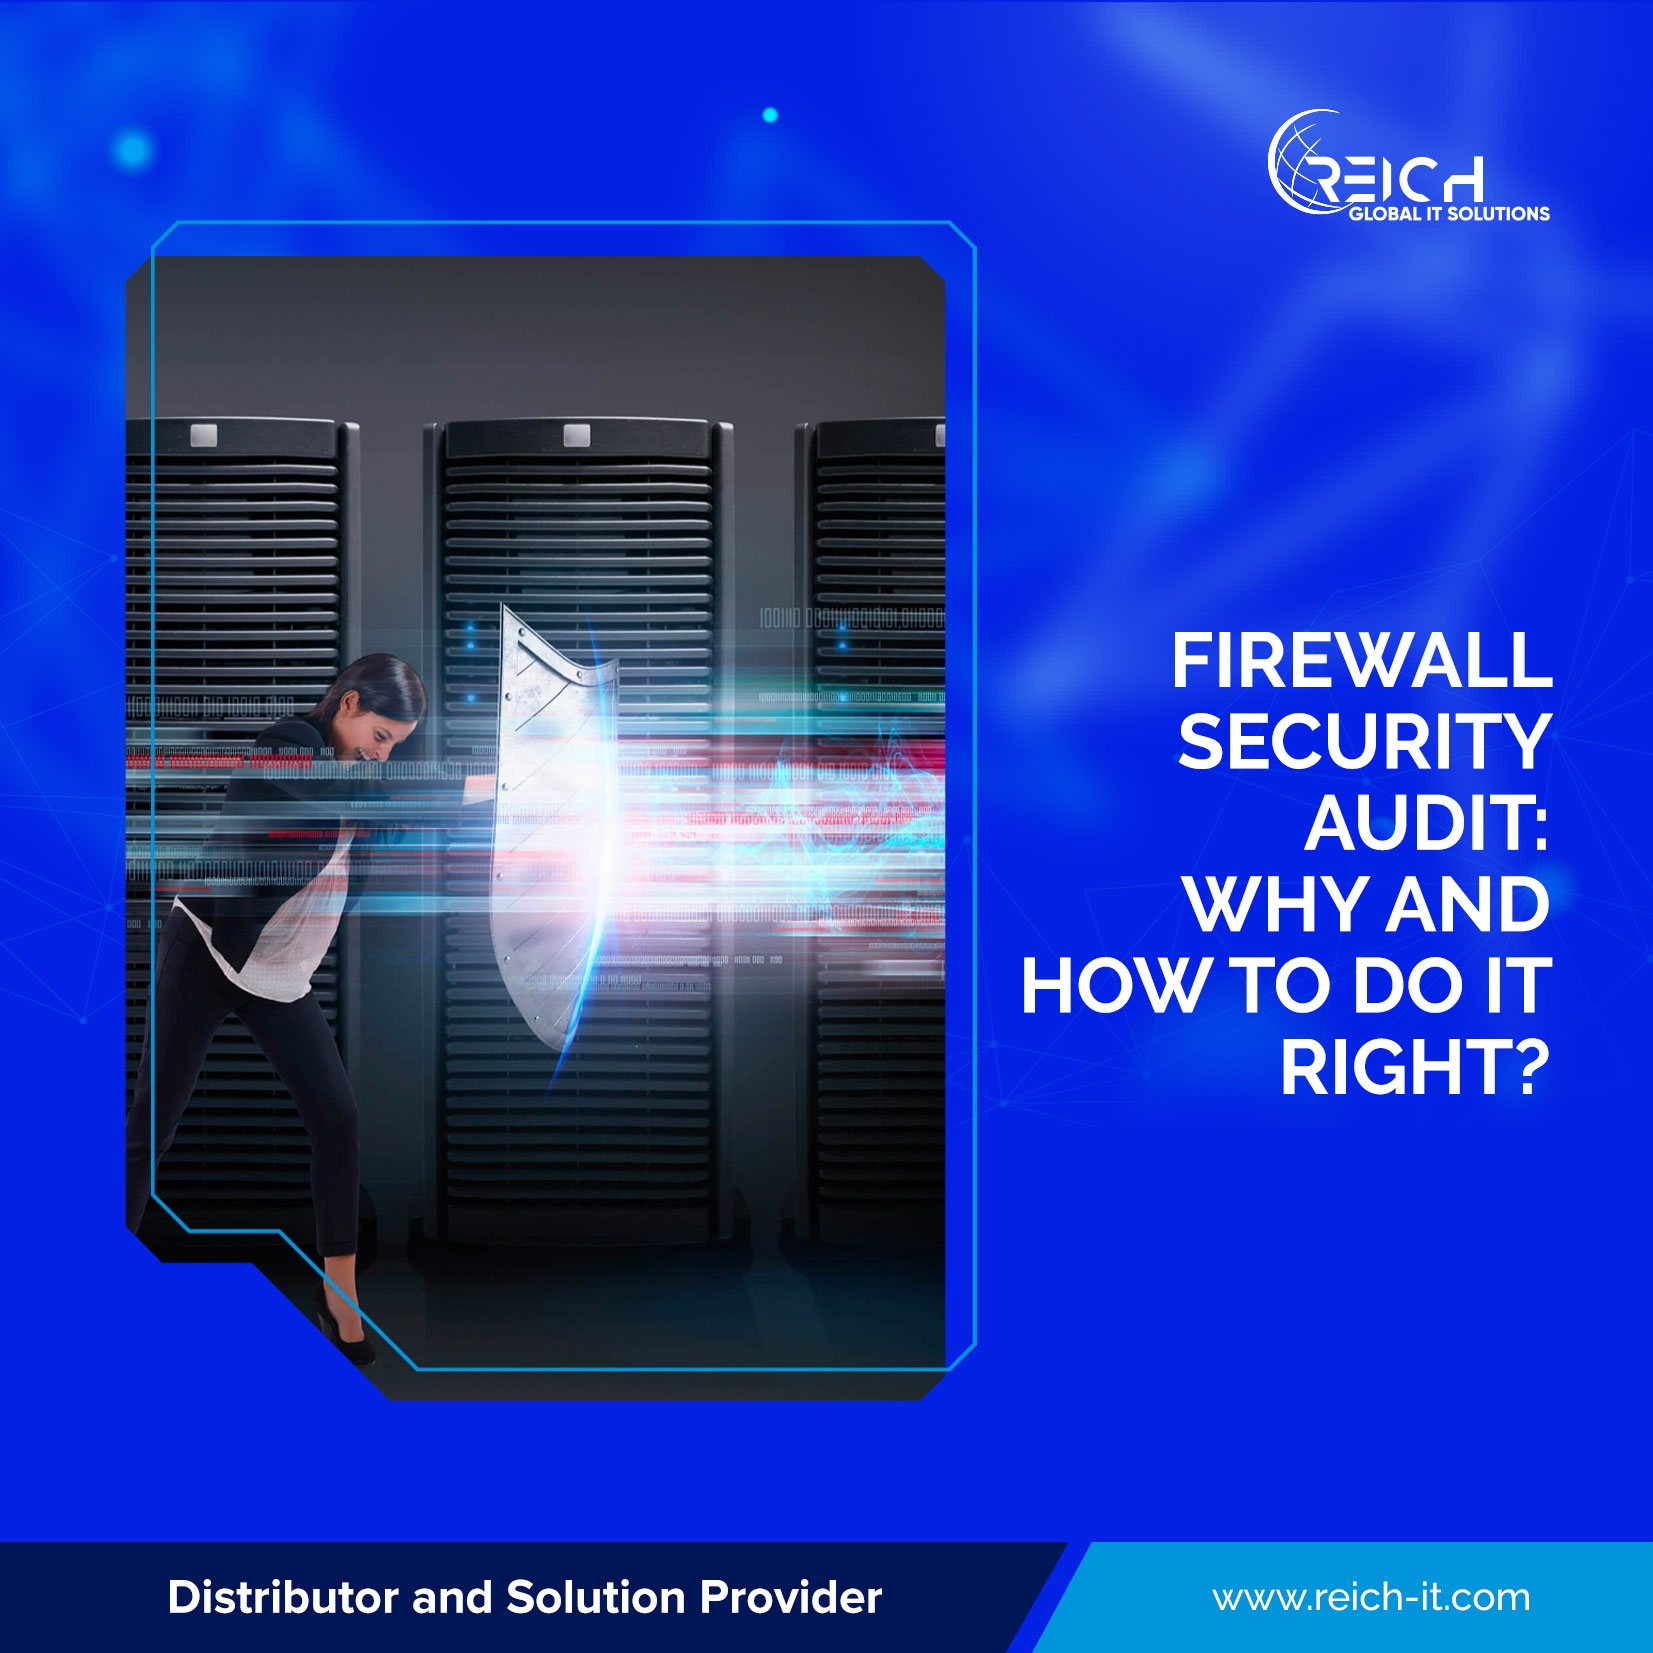 Firewall Security Audit: Why and how to do it right?